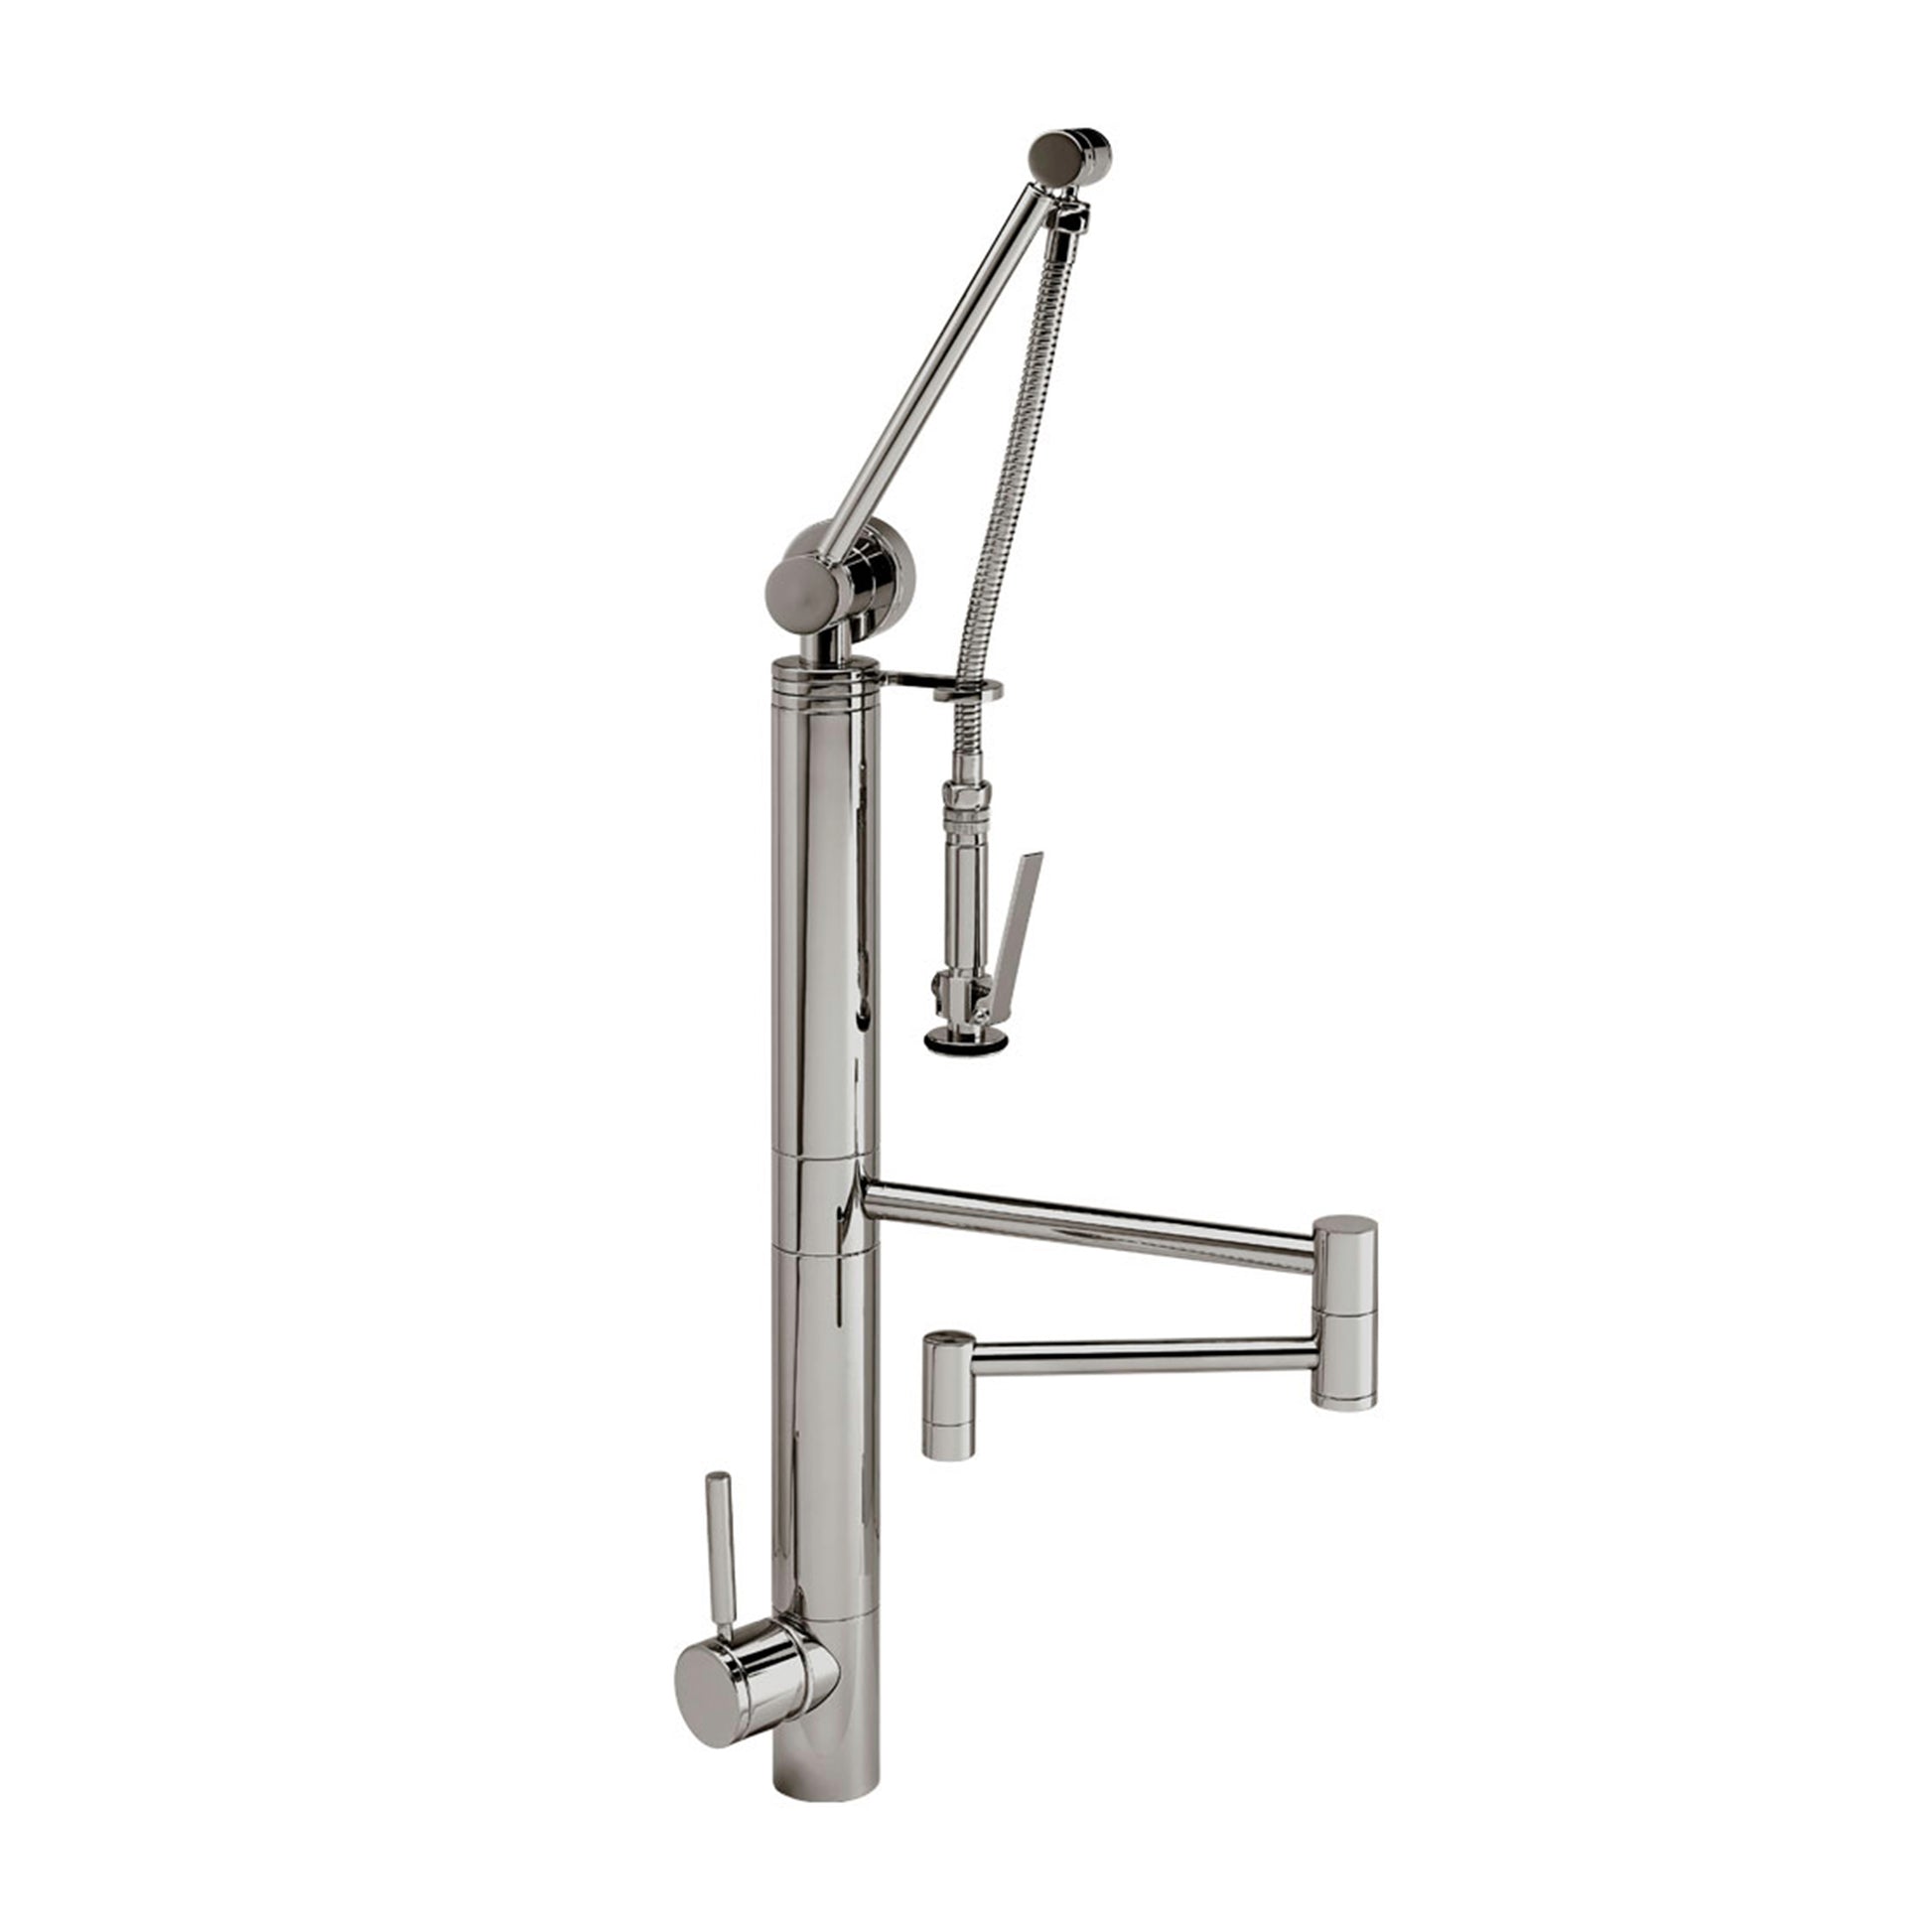 Waterstone Contemporary Gantry Faucet – Straight Spout 3710-18